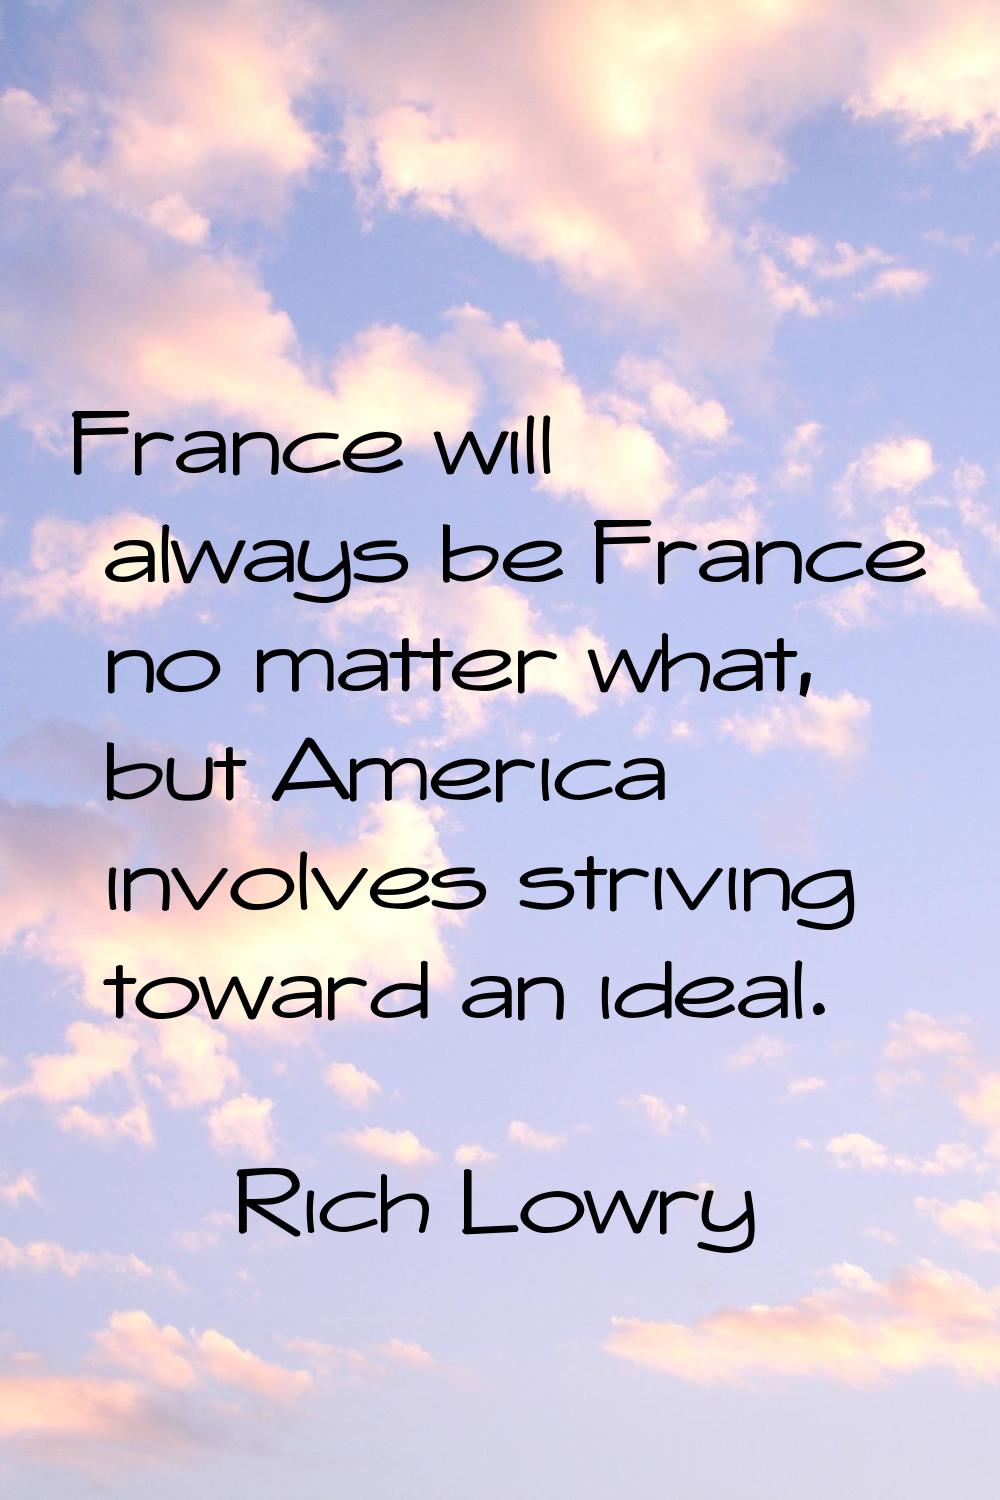 France will always be France no matter what, but America involves striving toward an ideal.